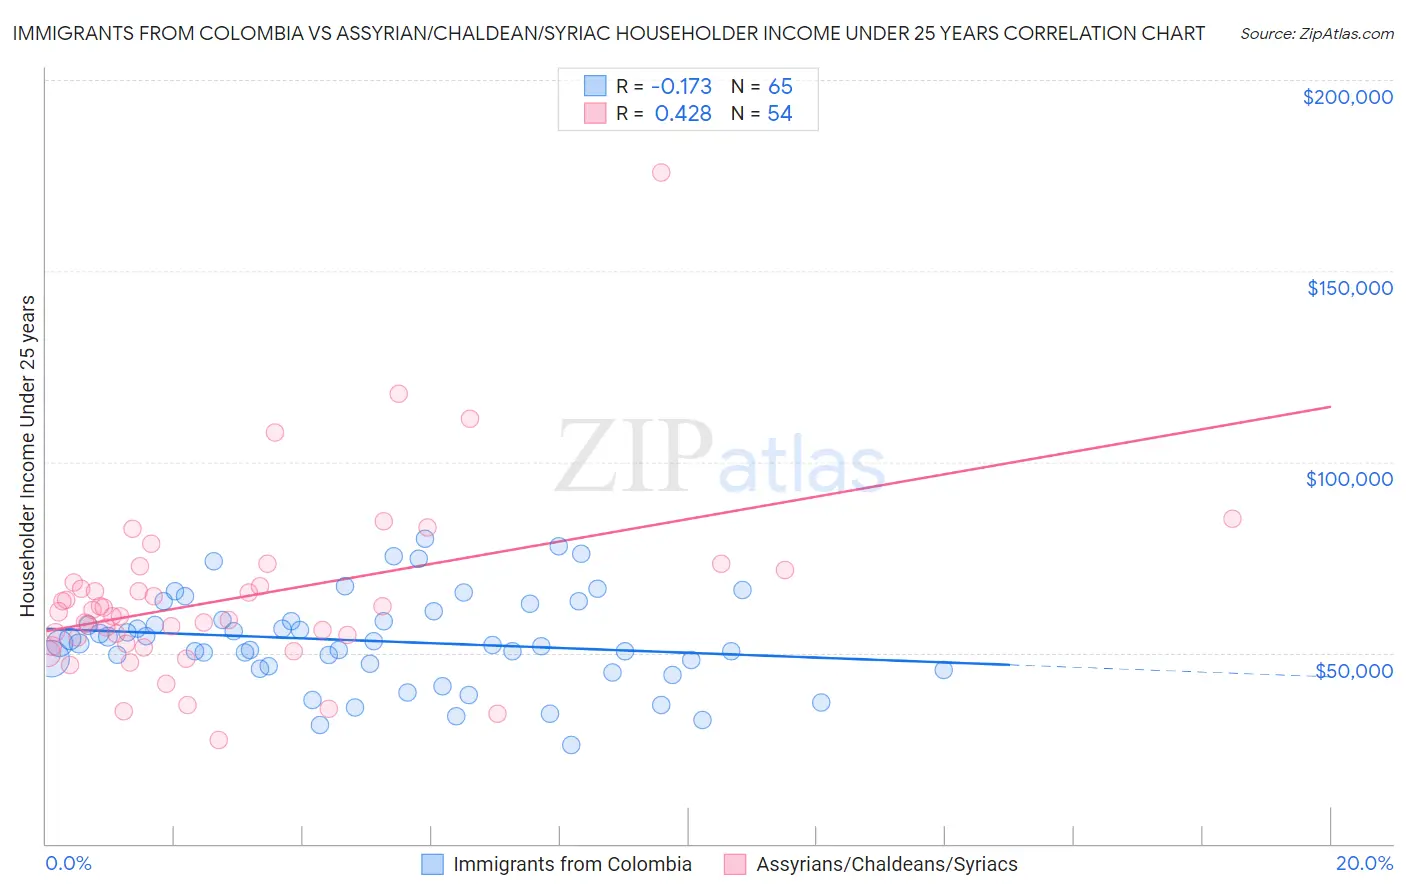 Immigrants from Colombia vs Assyrian/Chaldean/Syriac Householder Income Under 25 years